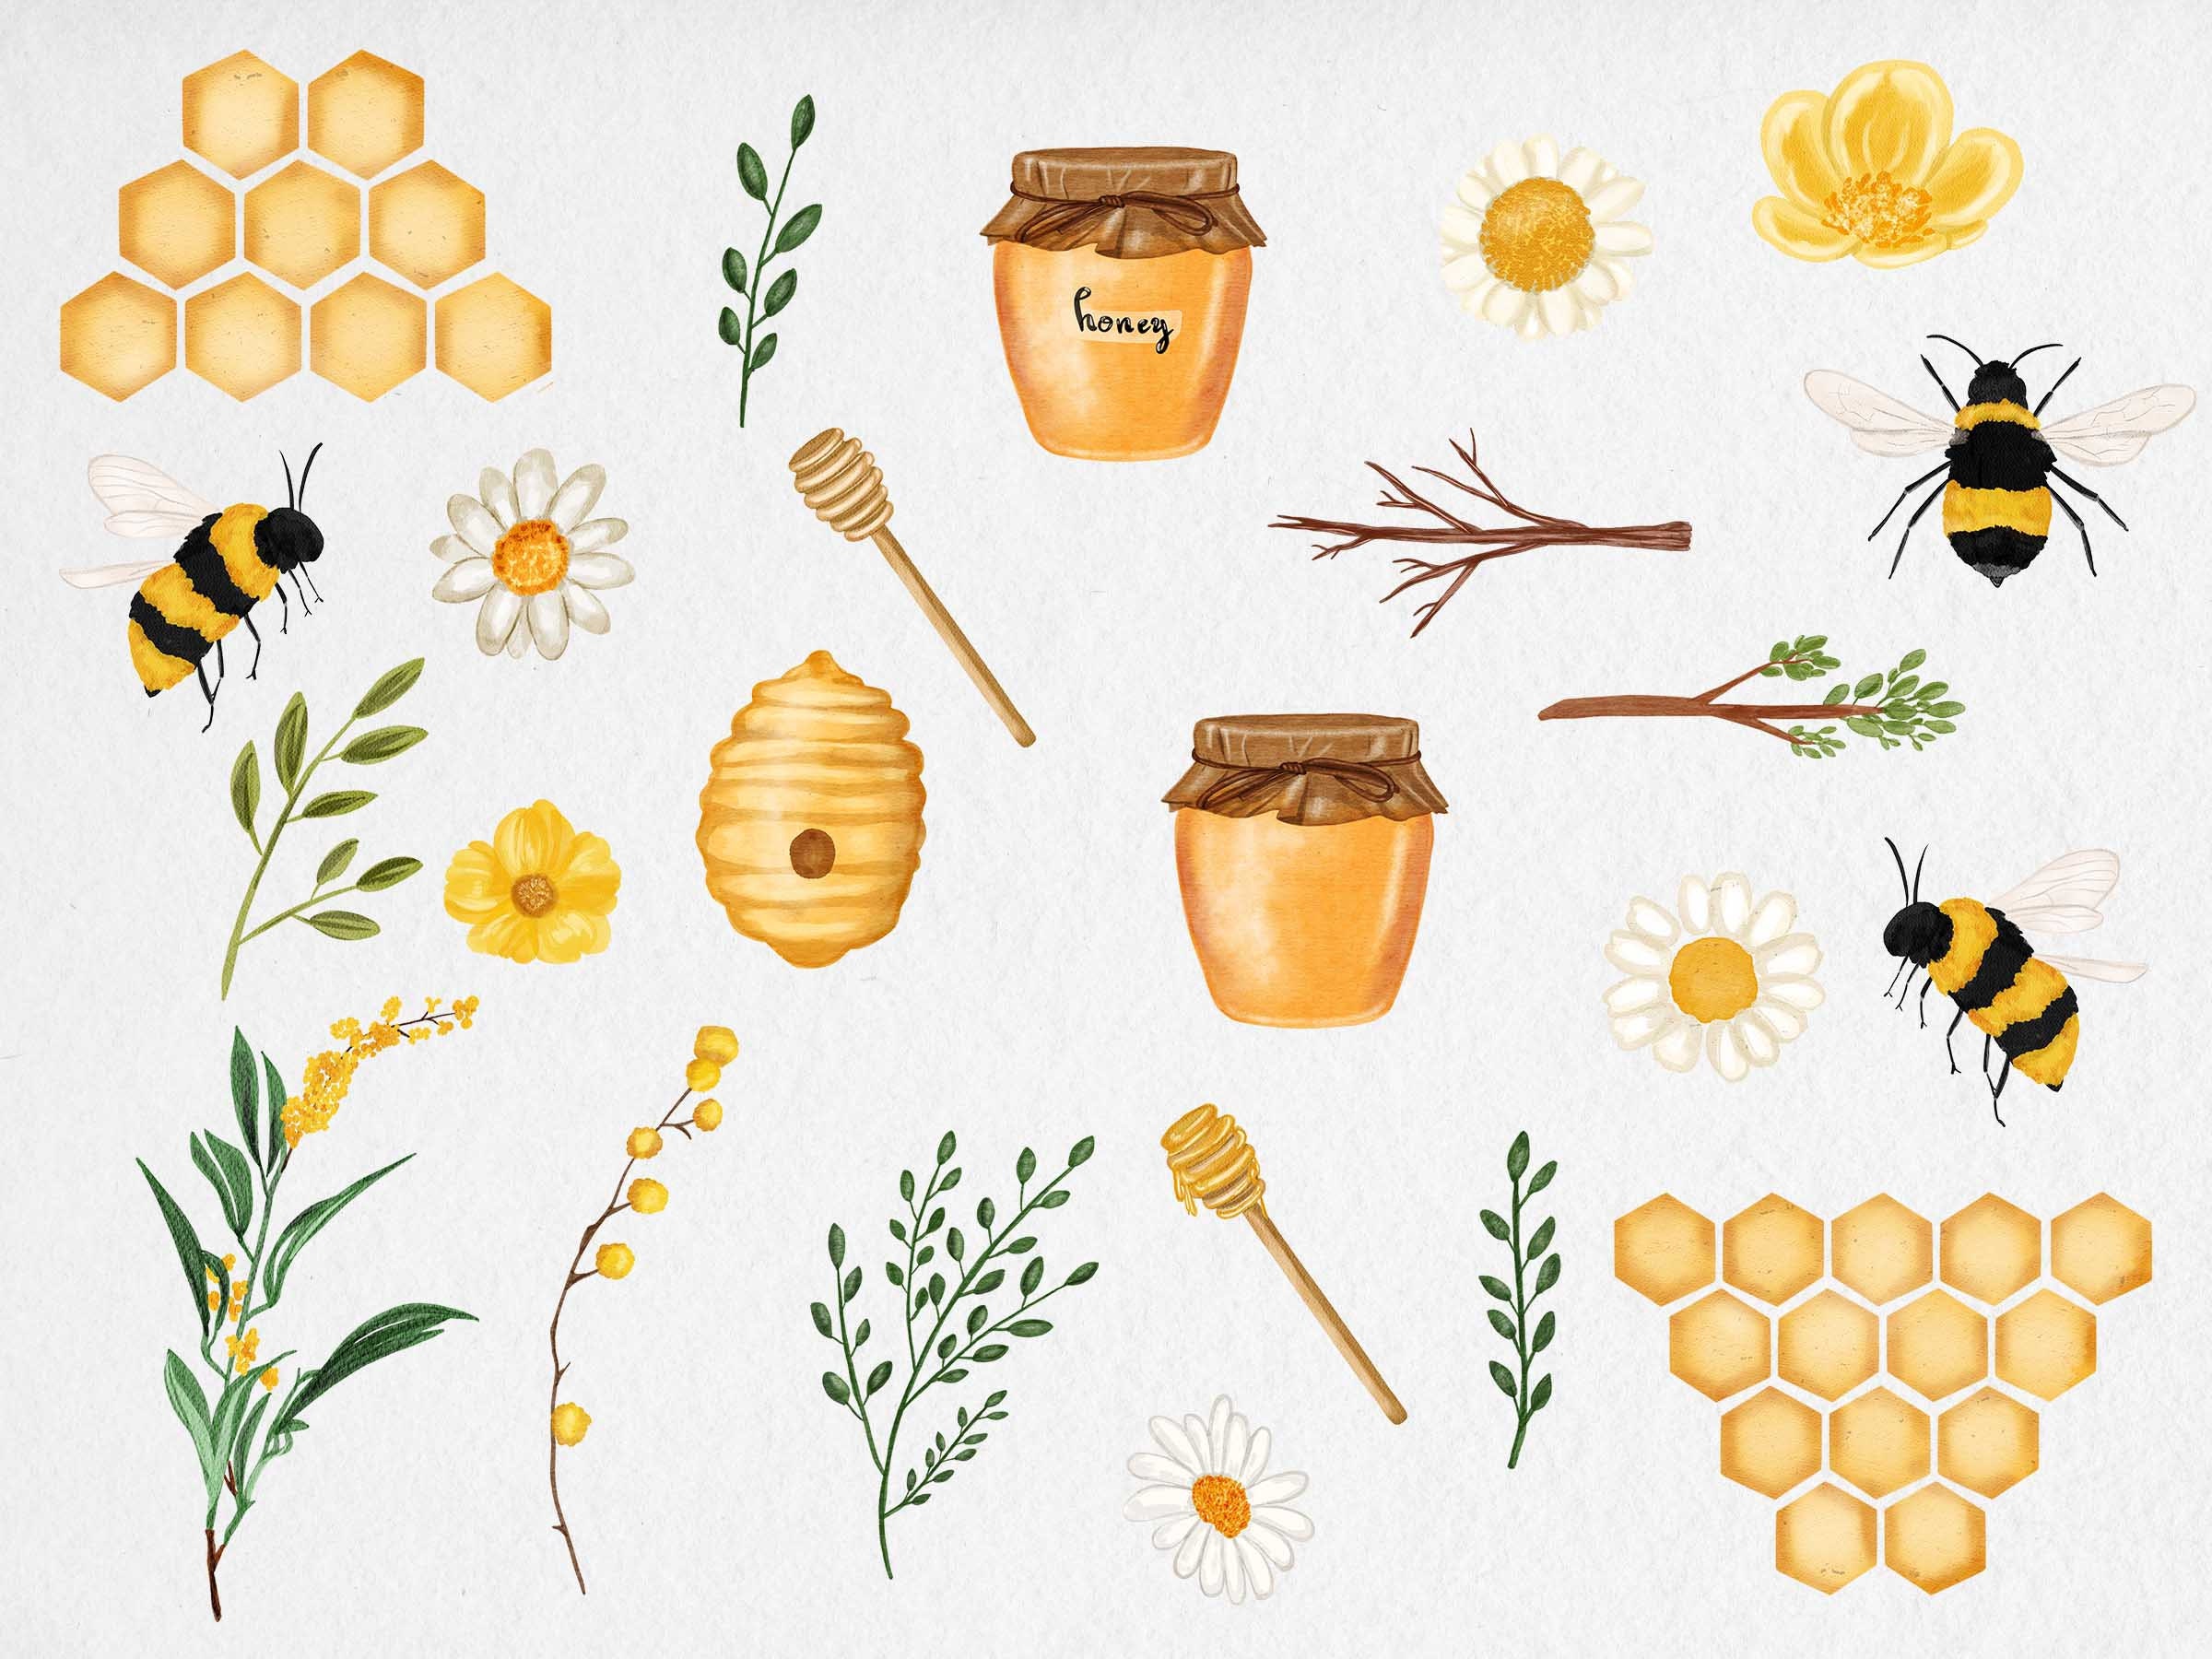 Watercolor Honey Bees Clipart. Bee Items Graphic by NKTKNS